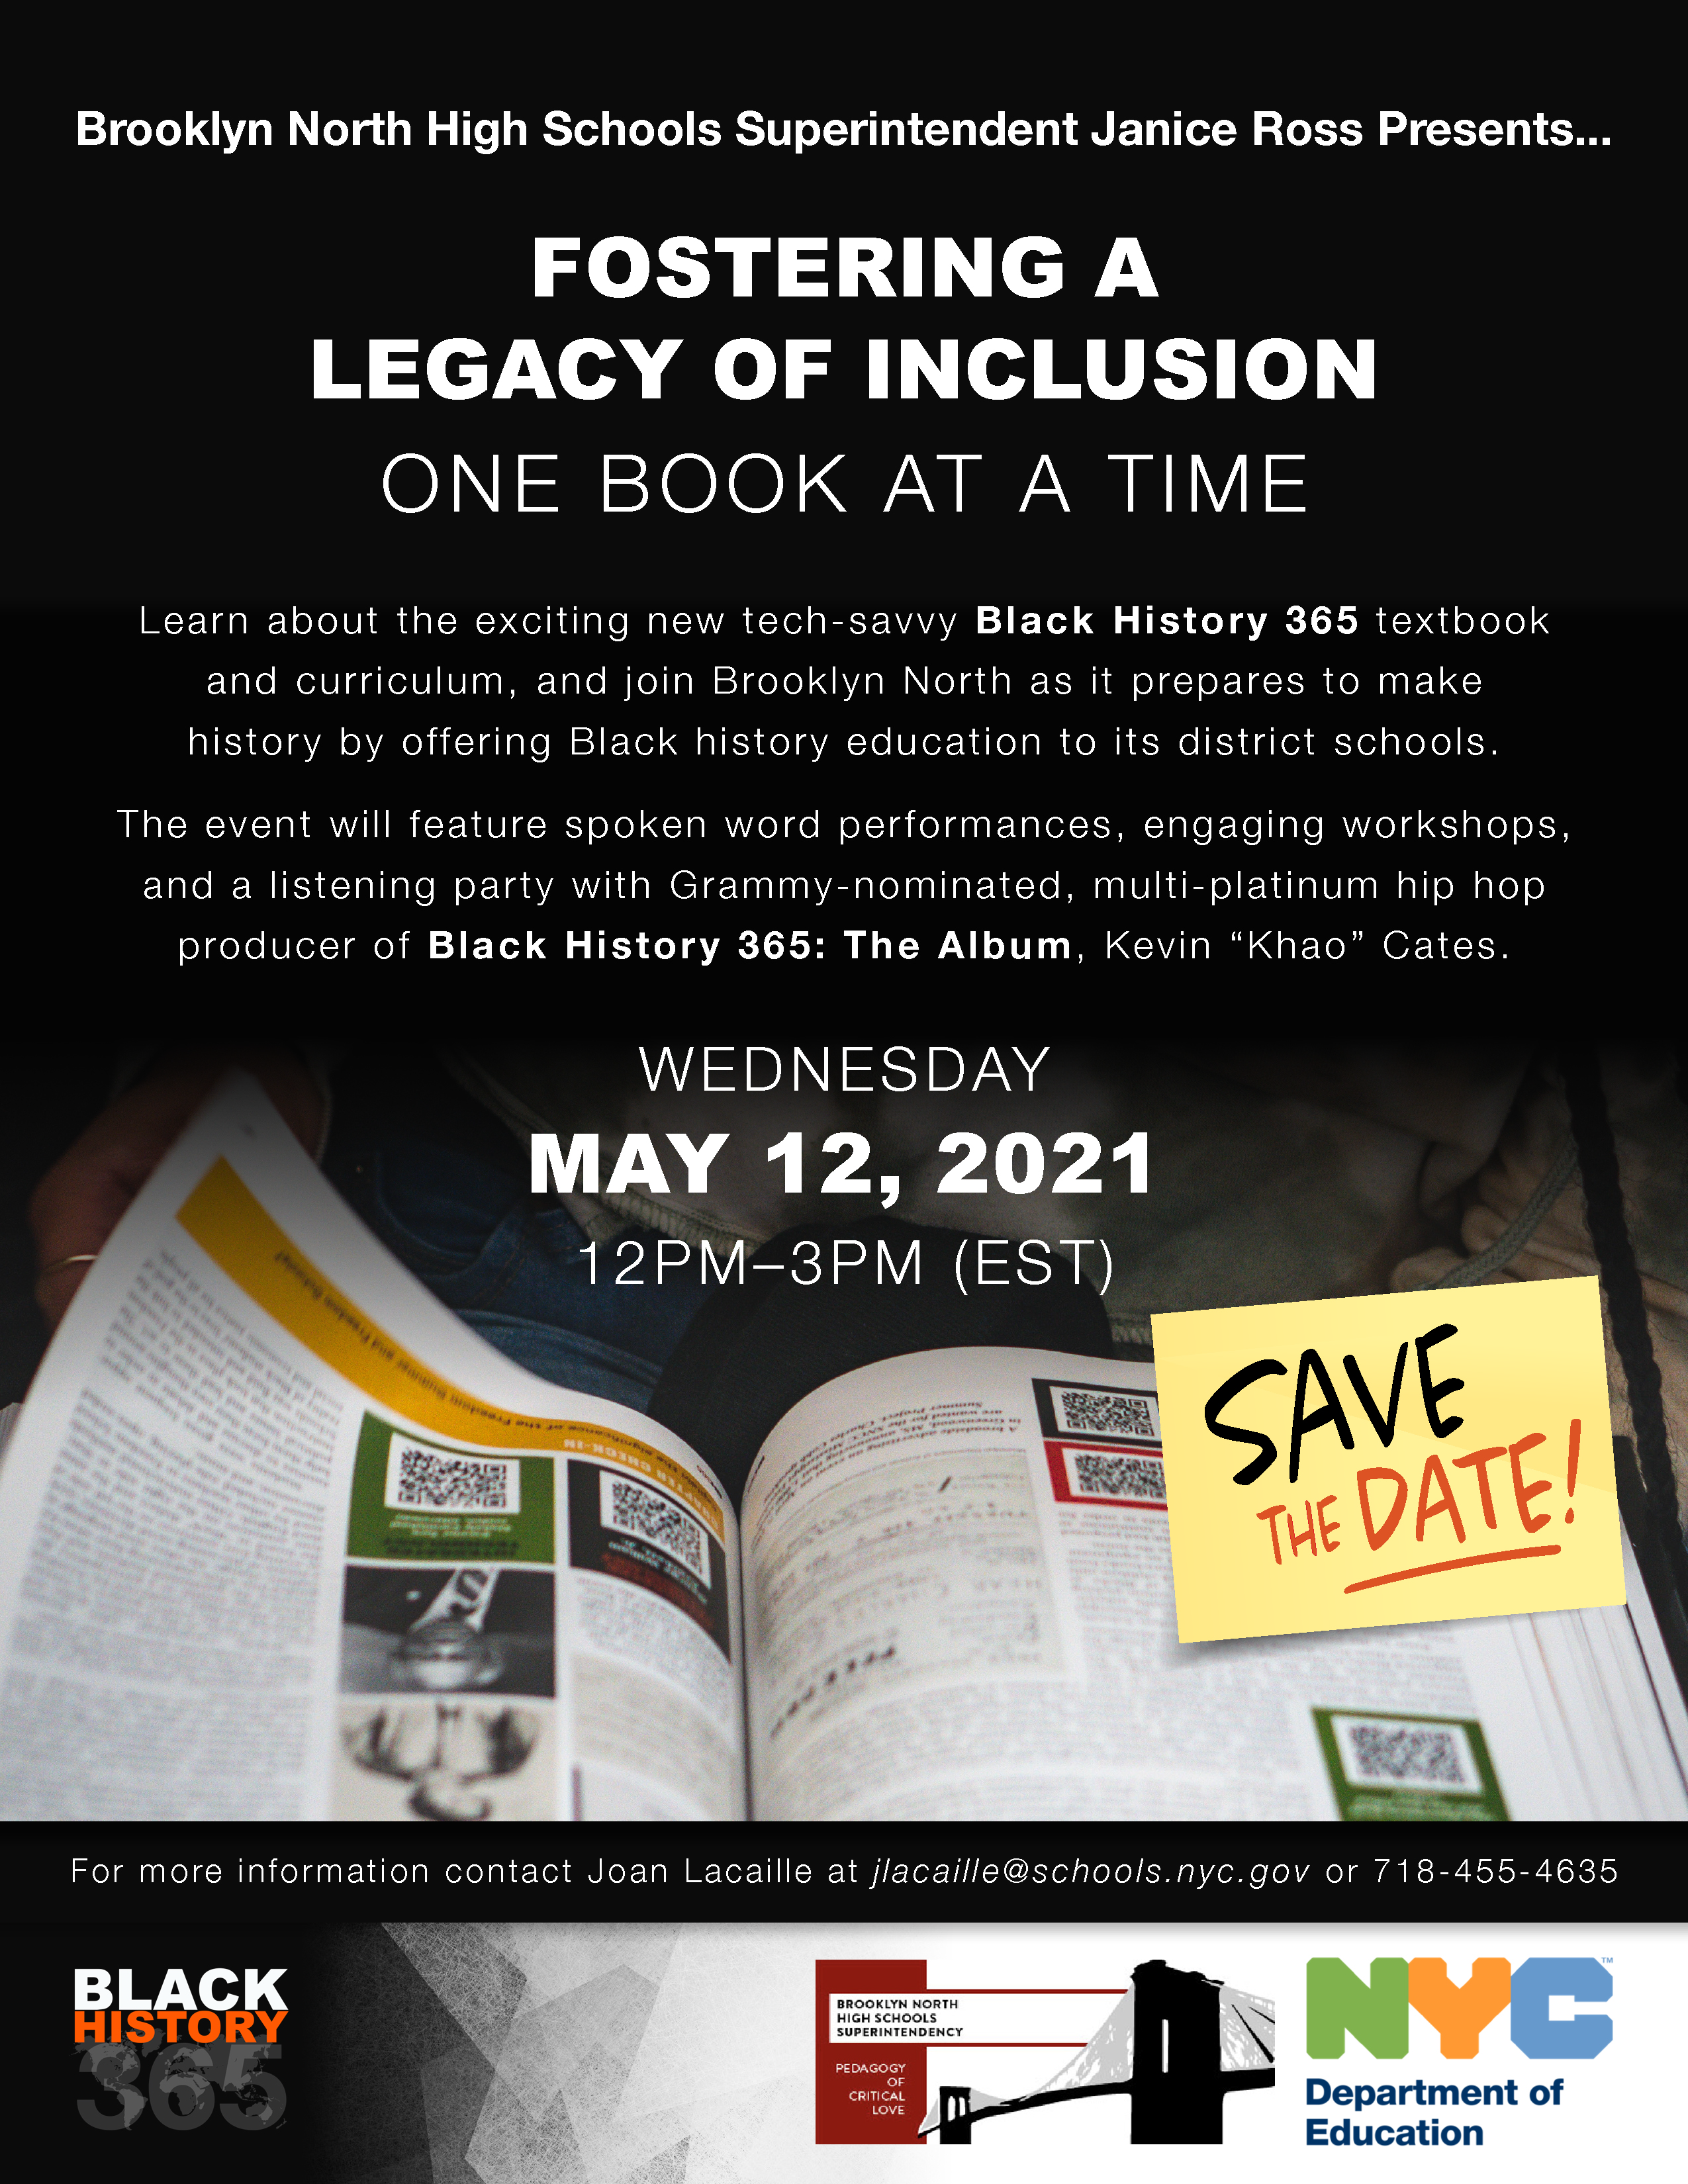 Fostering a Legacy of Inclusion - One Book at a Time